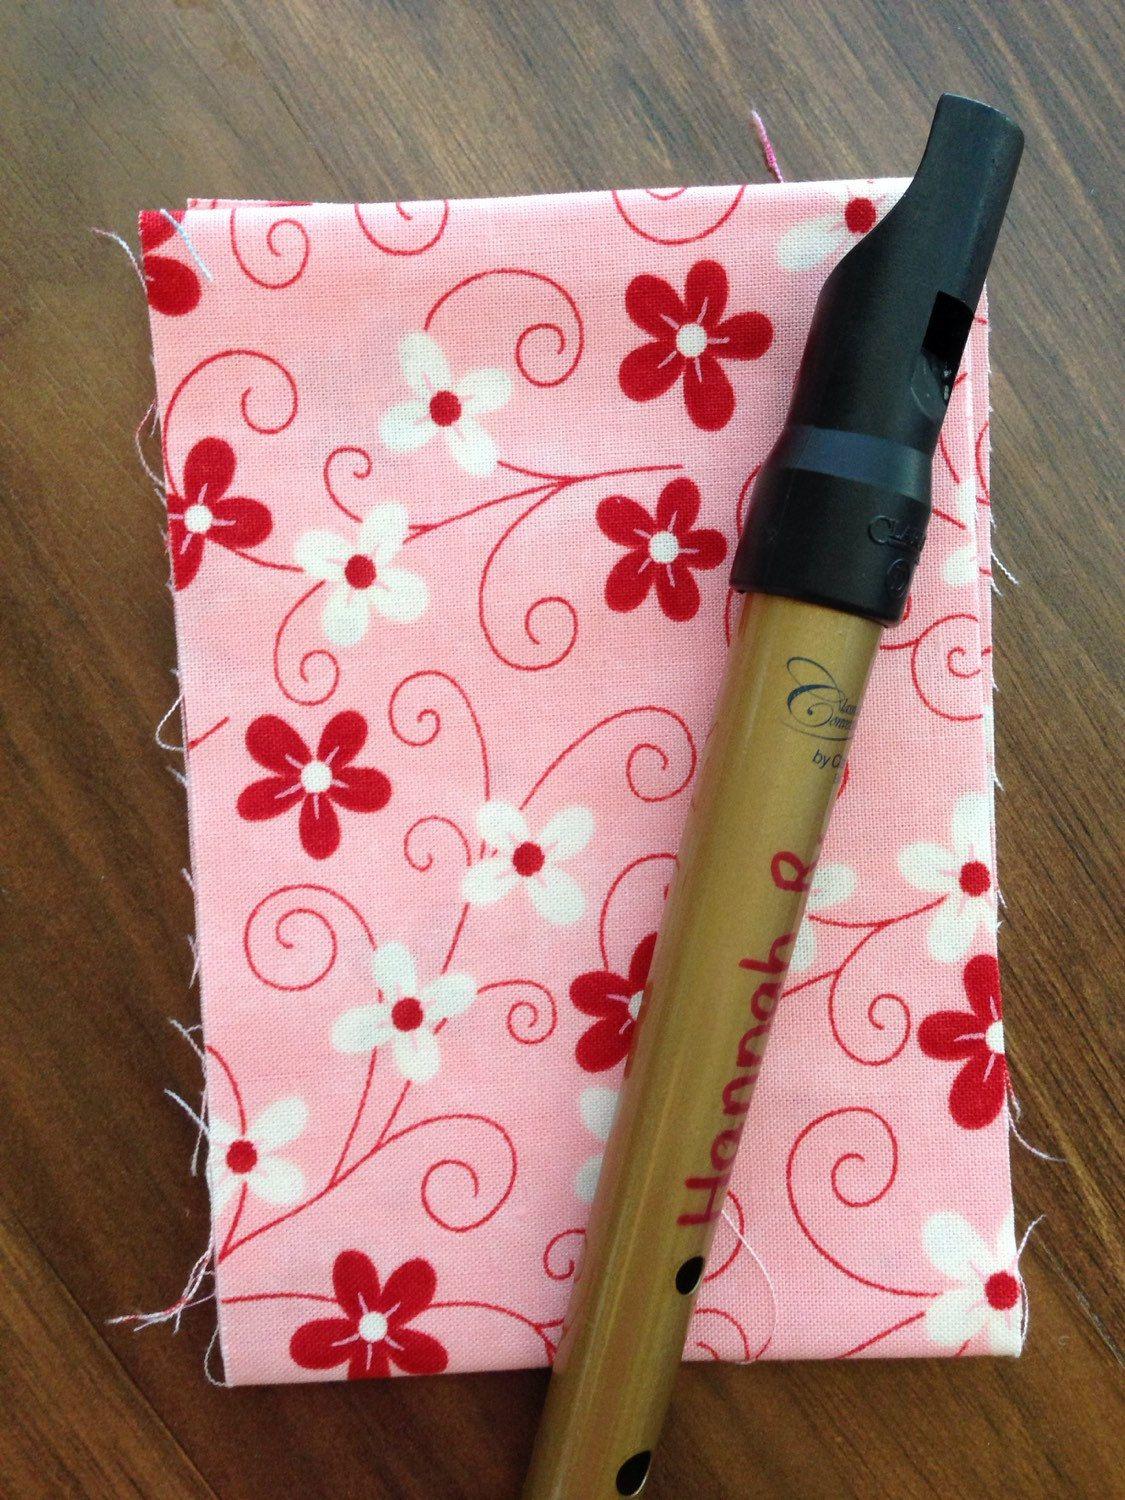 CLEARANCE- Tin Whistle Bag, Recorder Cover, Irish Penny Whistle